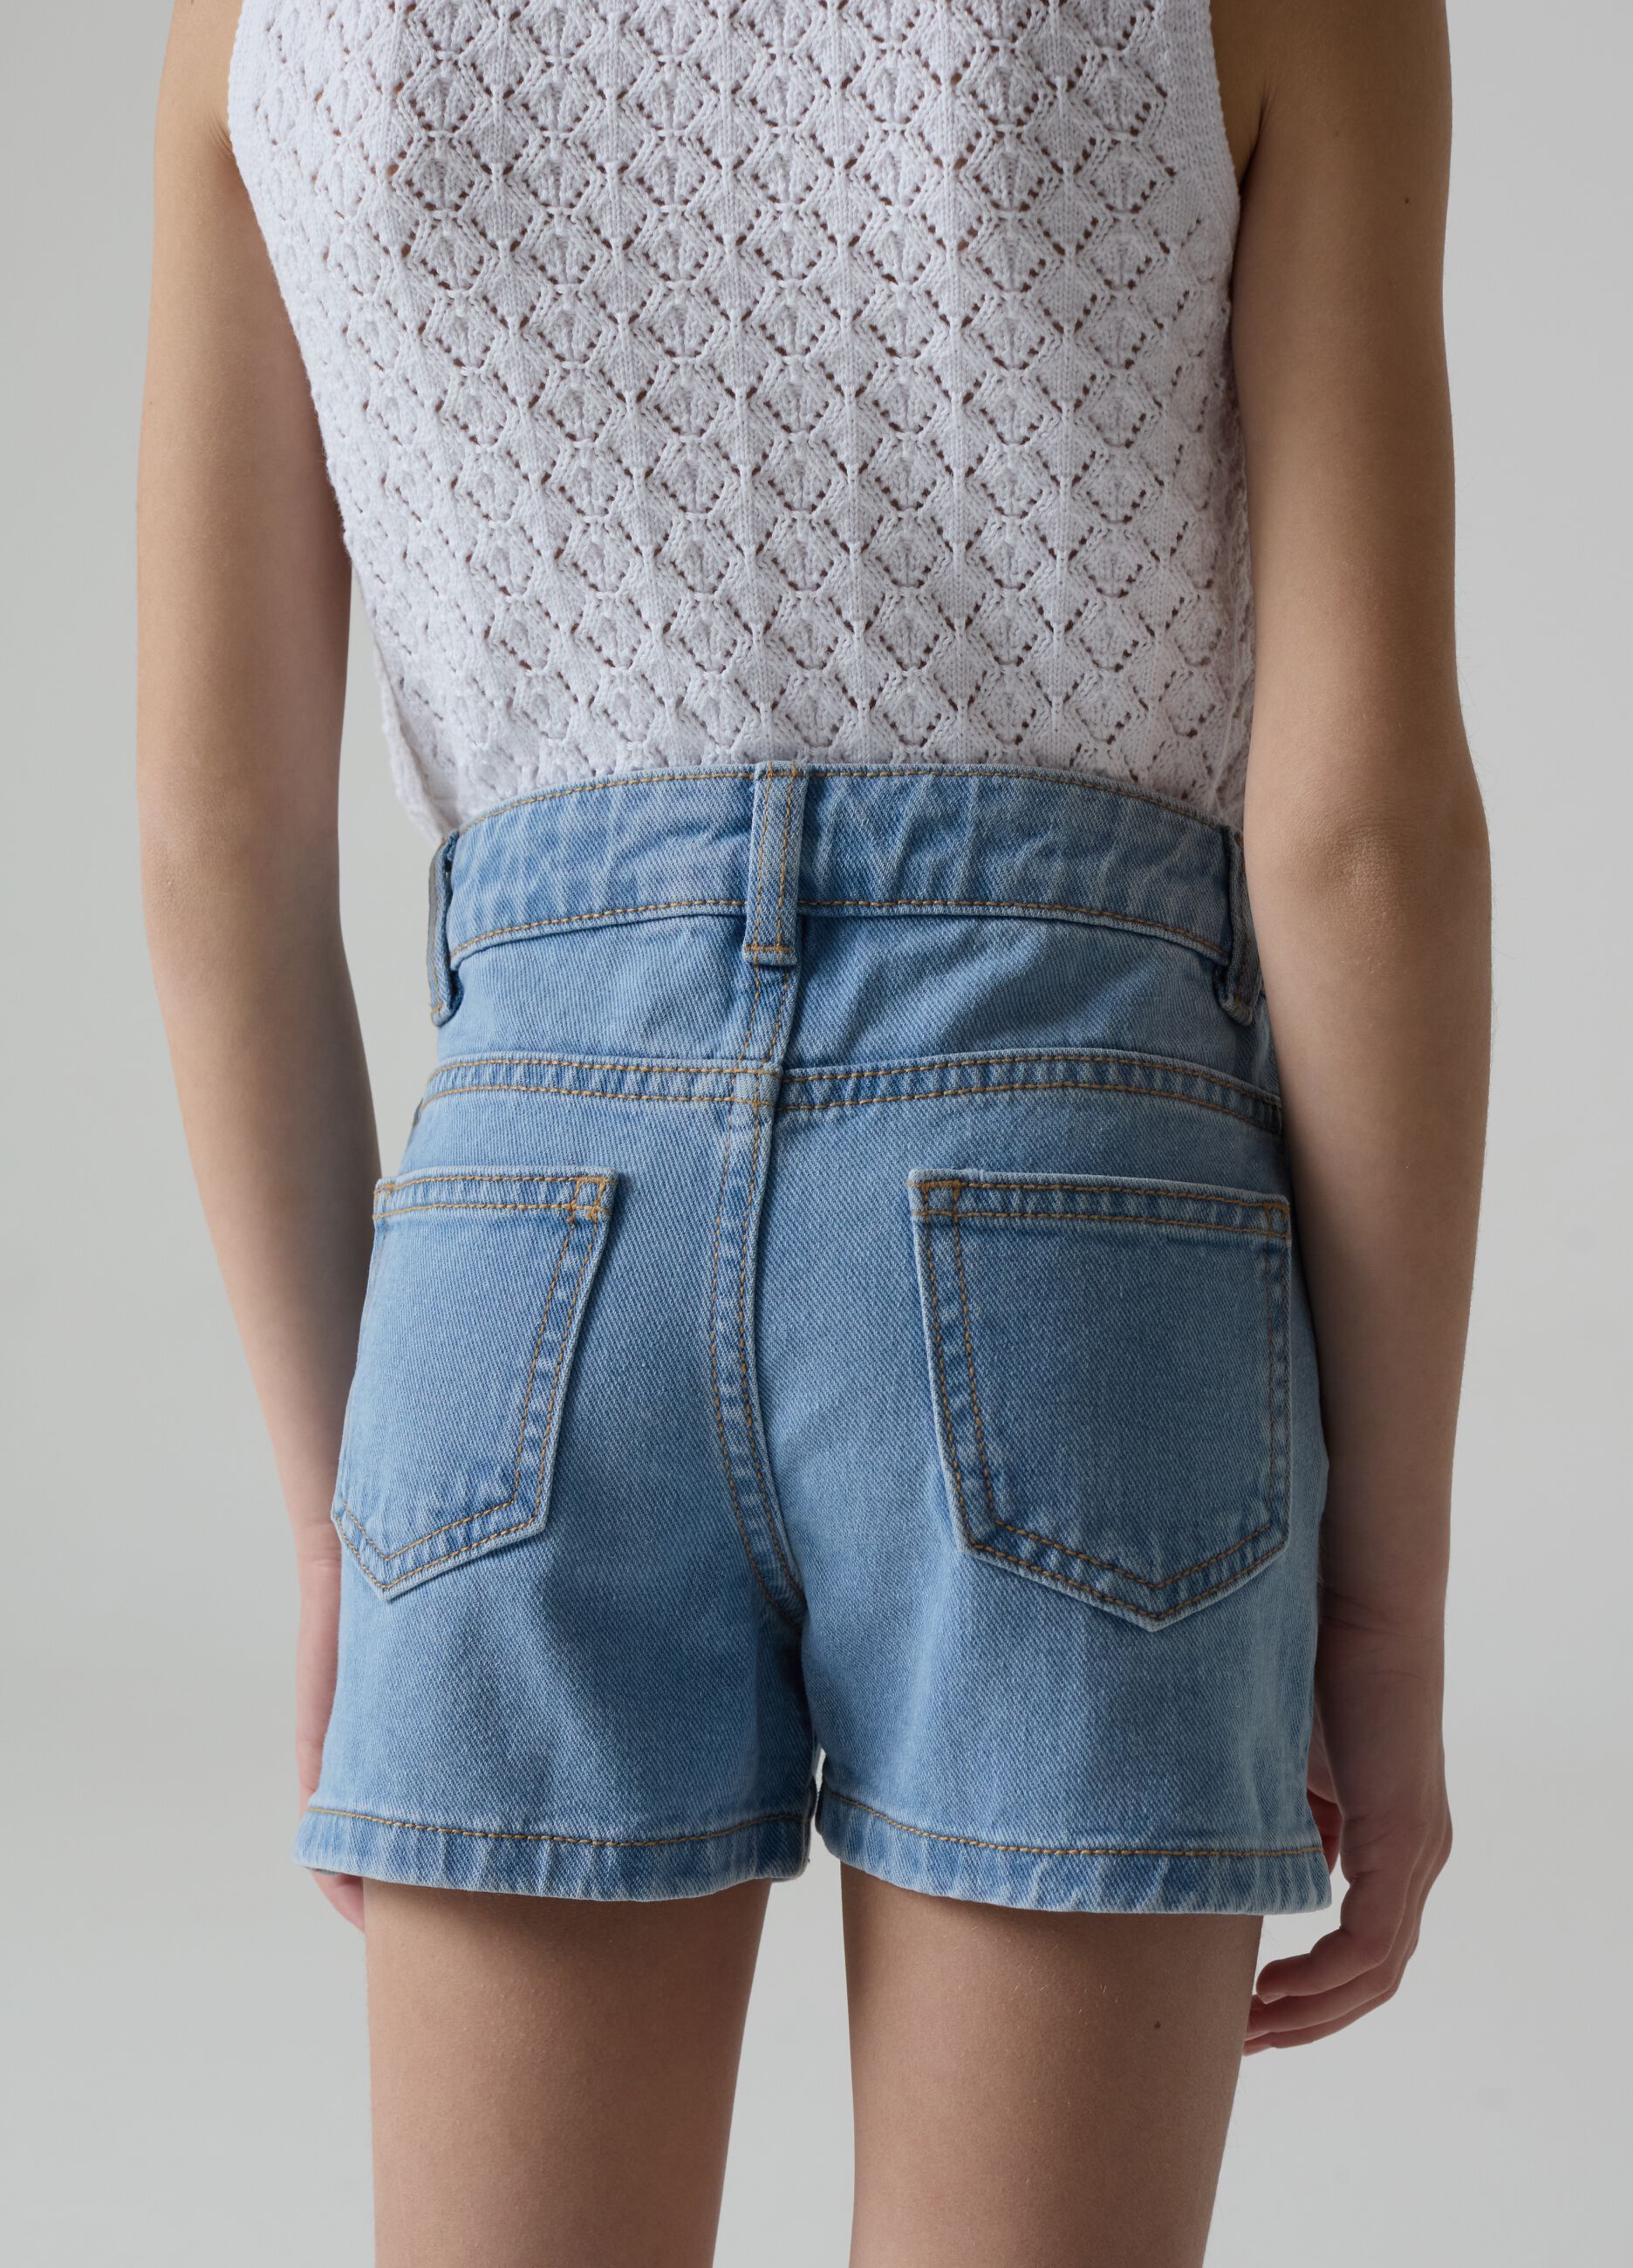 Denim shorts with flowers embroidery